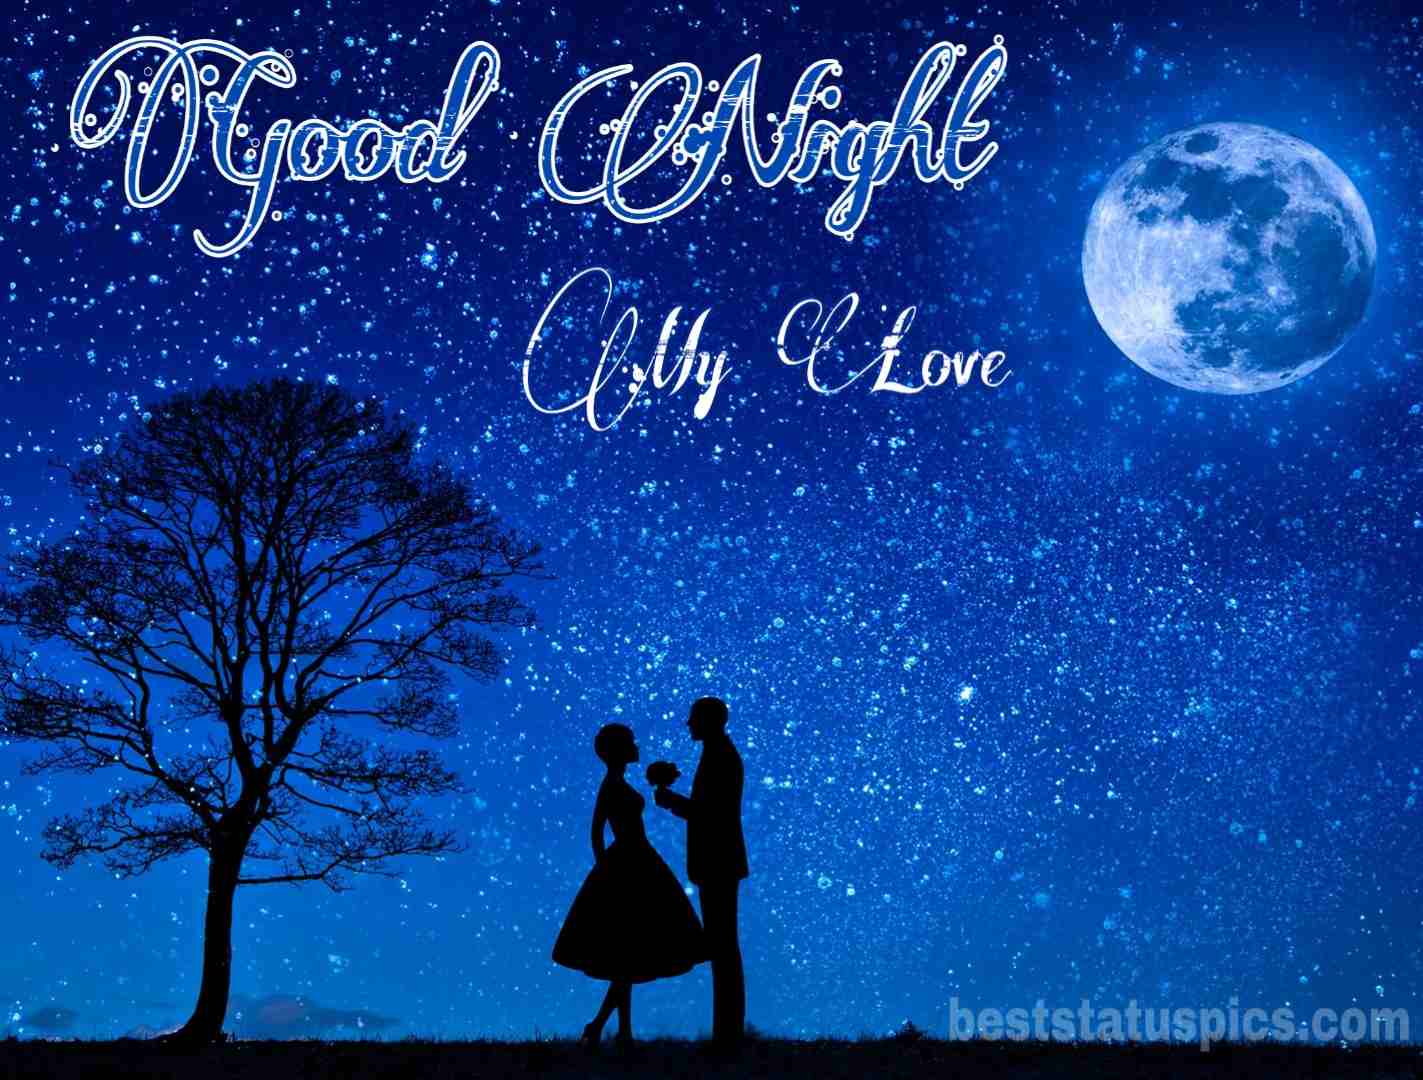 Good Night Images With Romantic Love Couple Download Hd Best Status Pics